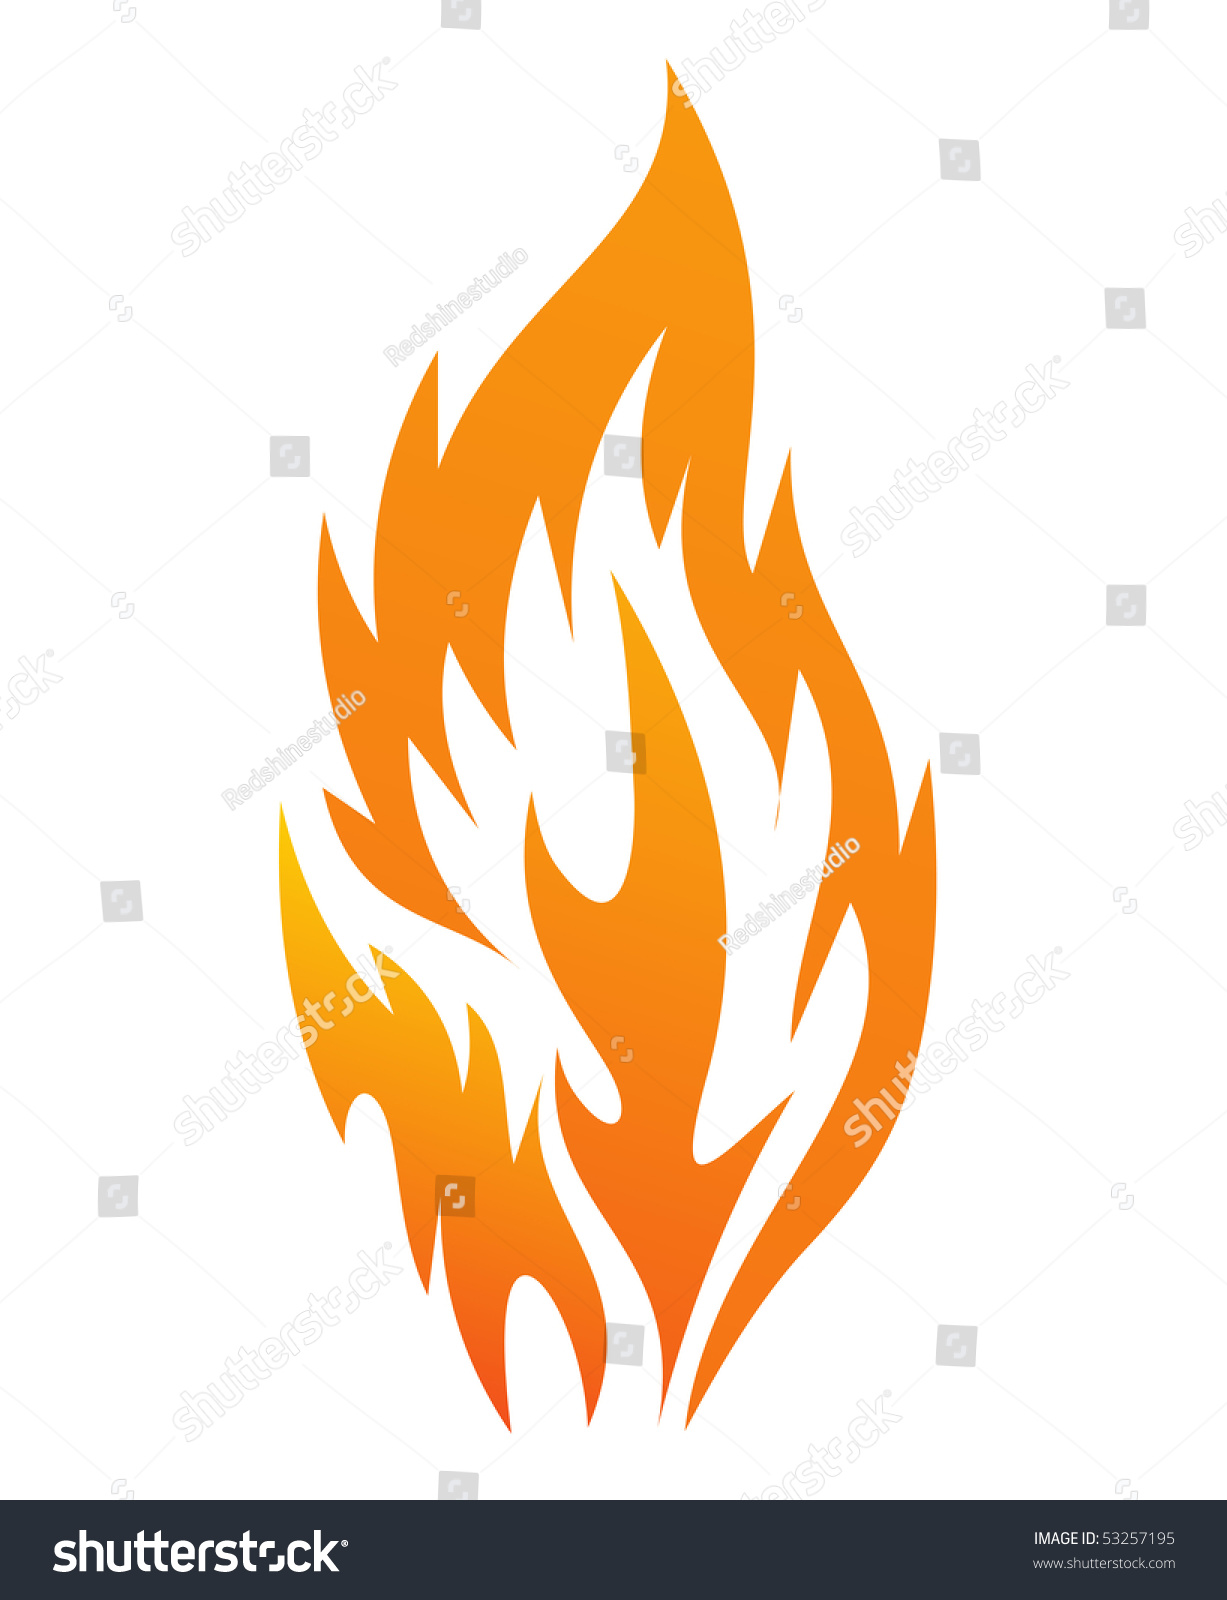 Fire Icon On A White Background, Vector Illustration - 53257195